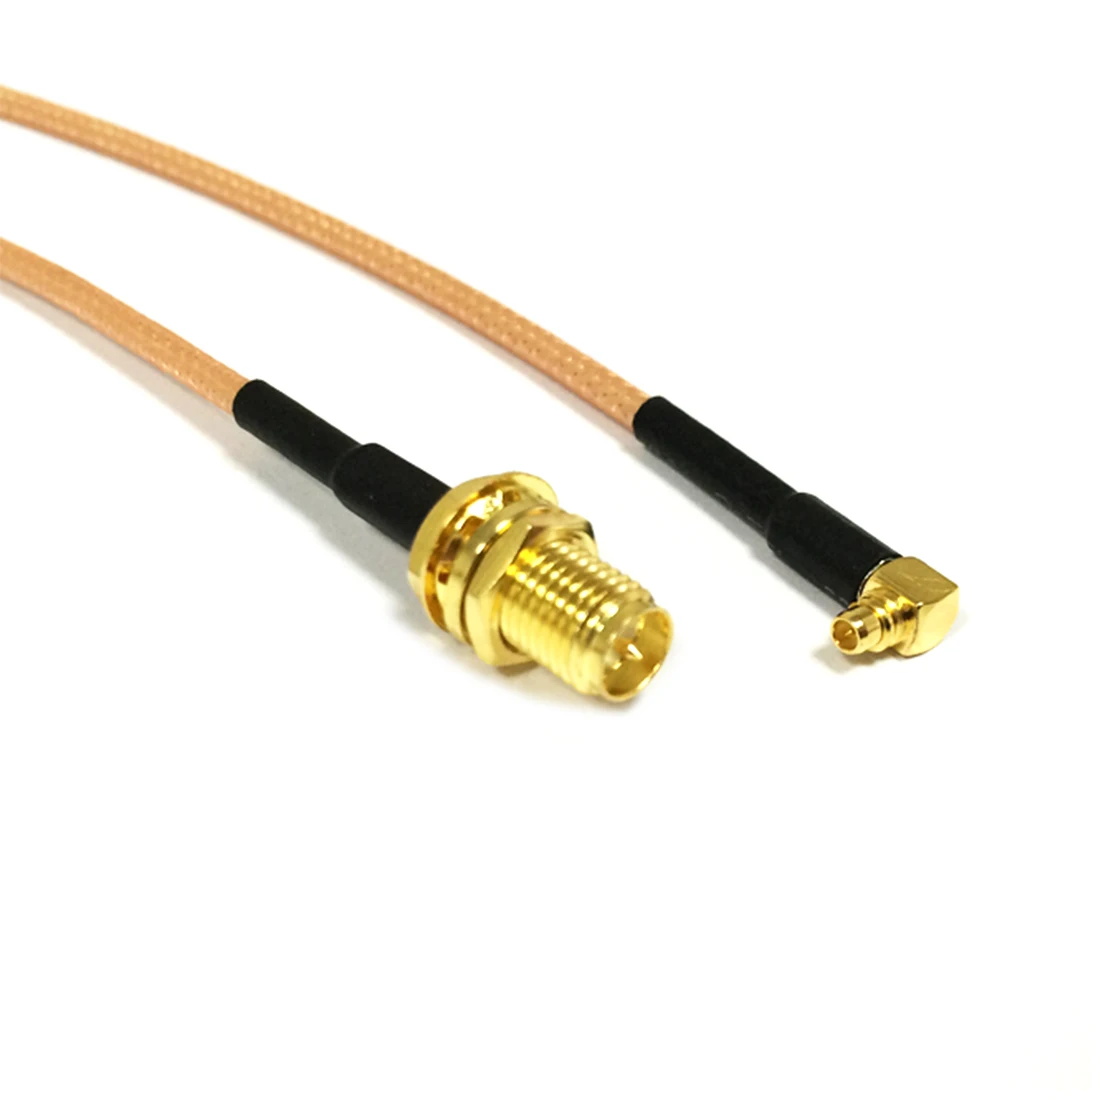 New Modem Conversion Cable RP-SMA Female Jack To MMCX Male Plug Right Angle Connector RG316 Wire 15CM 6